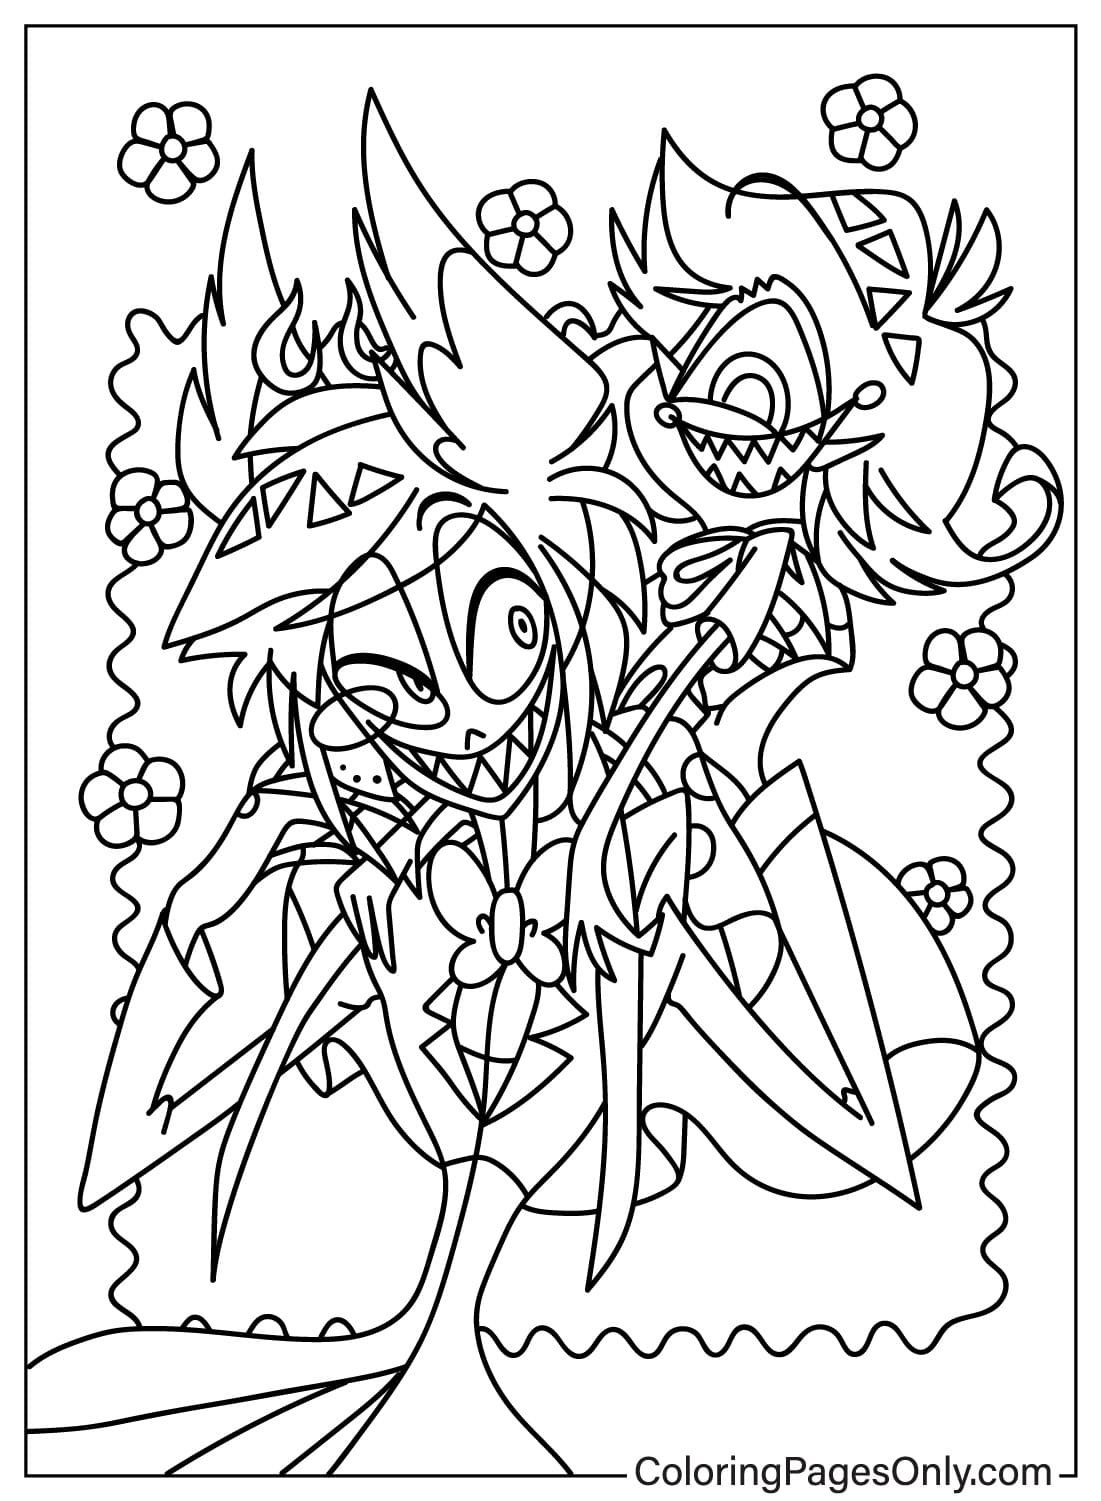 Alastor and Niffty Coloring Page from Hazbin Hotel